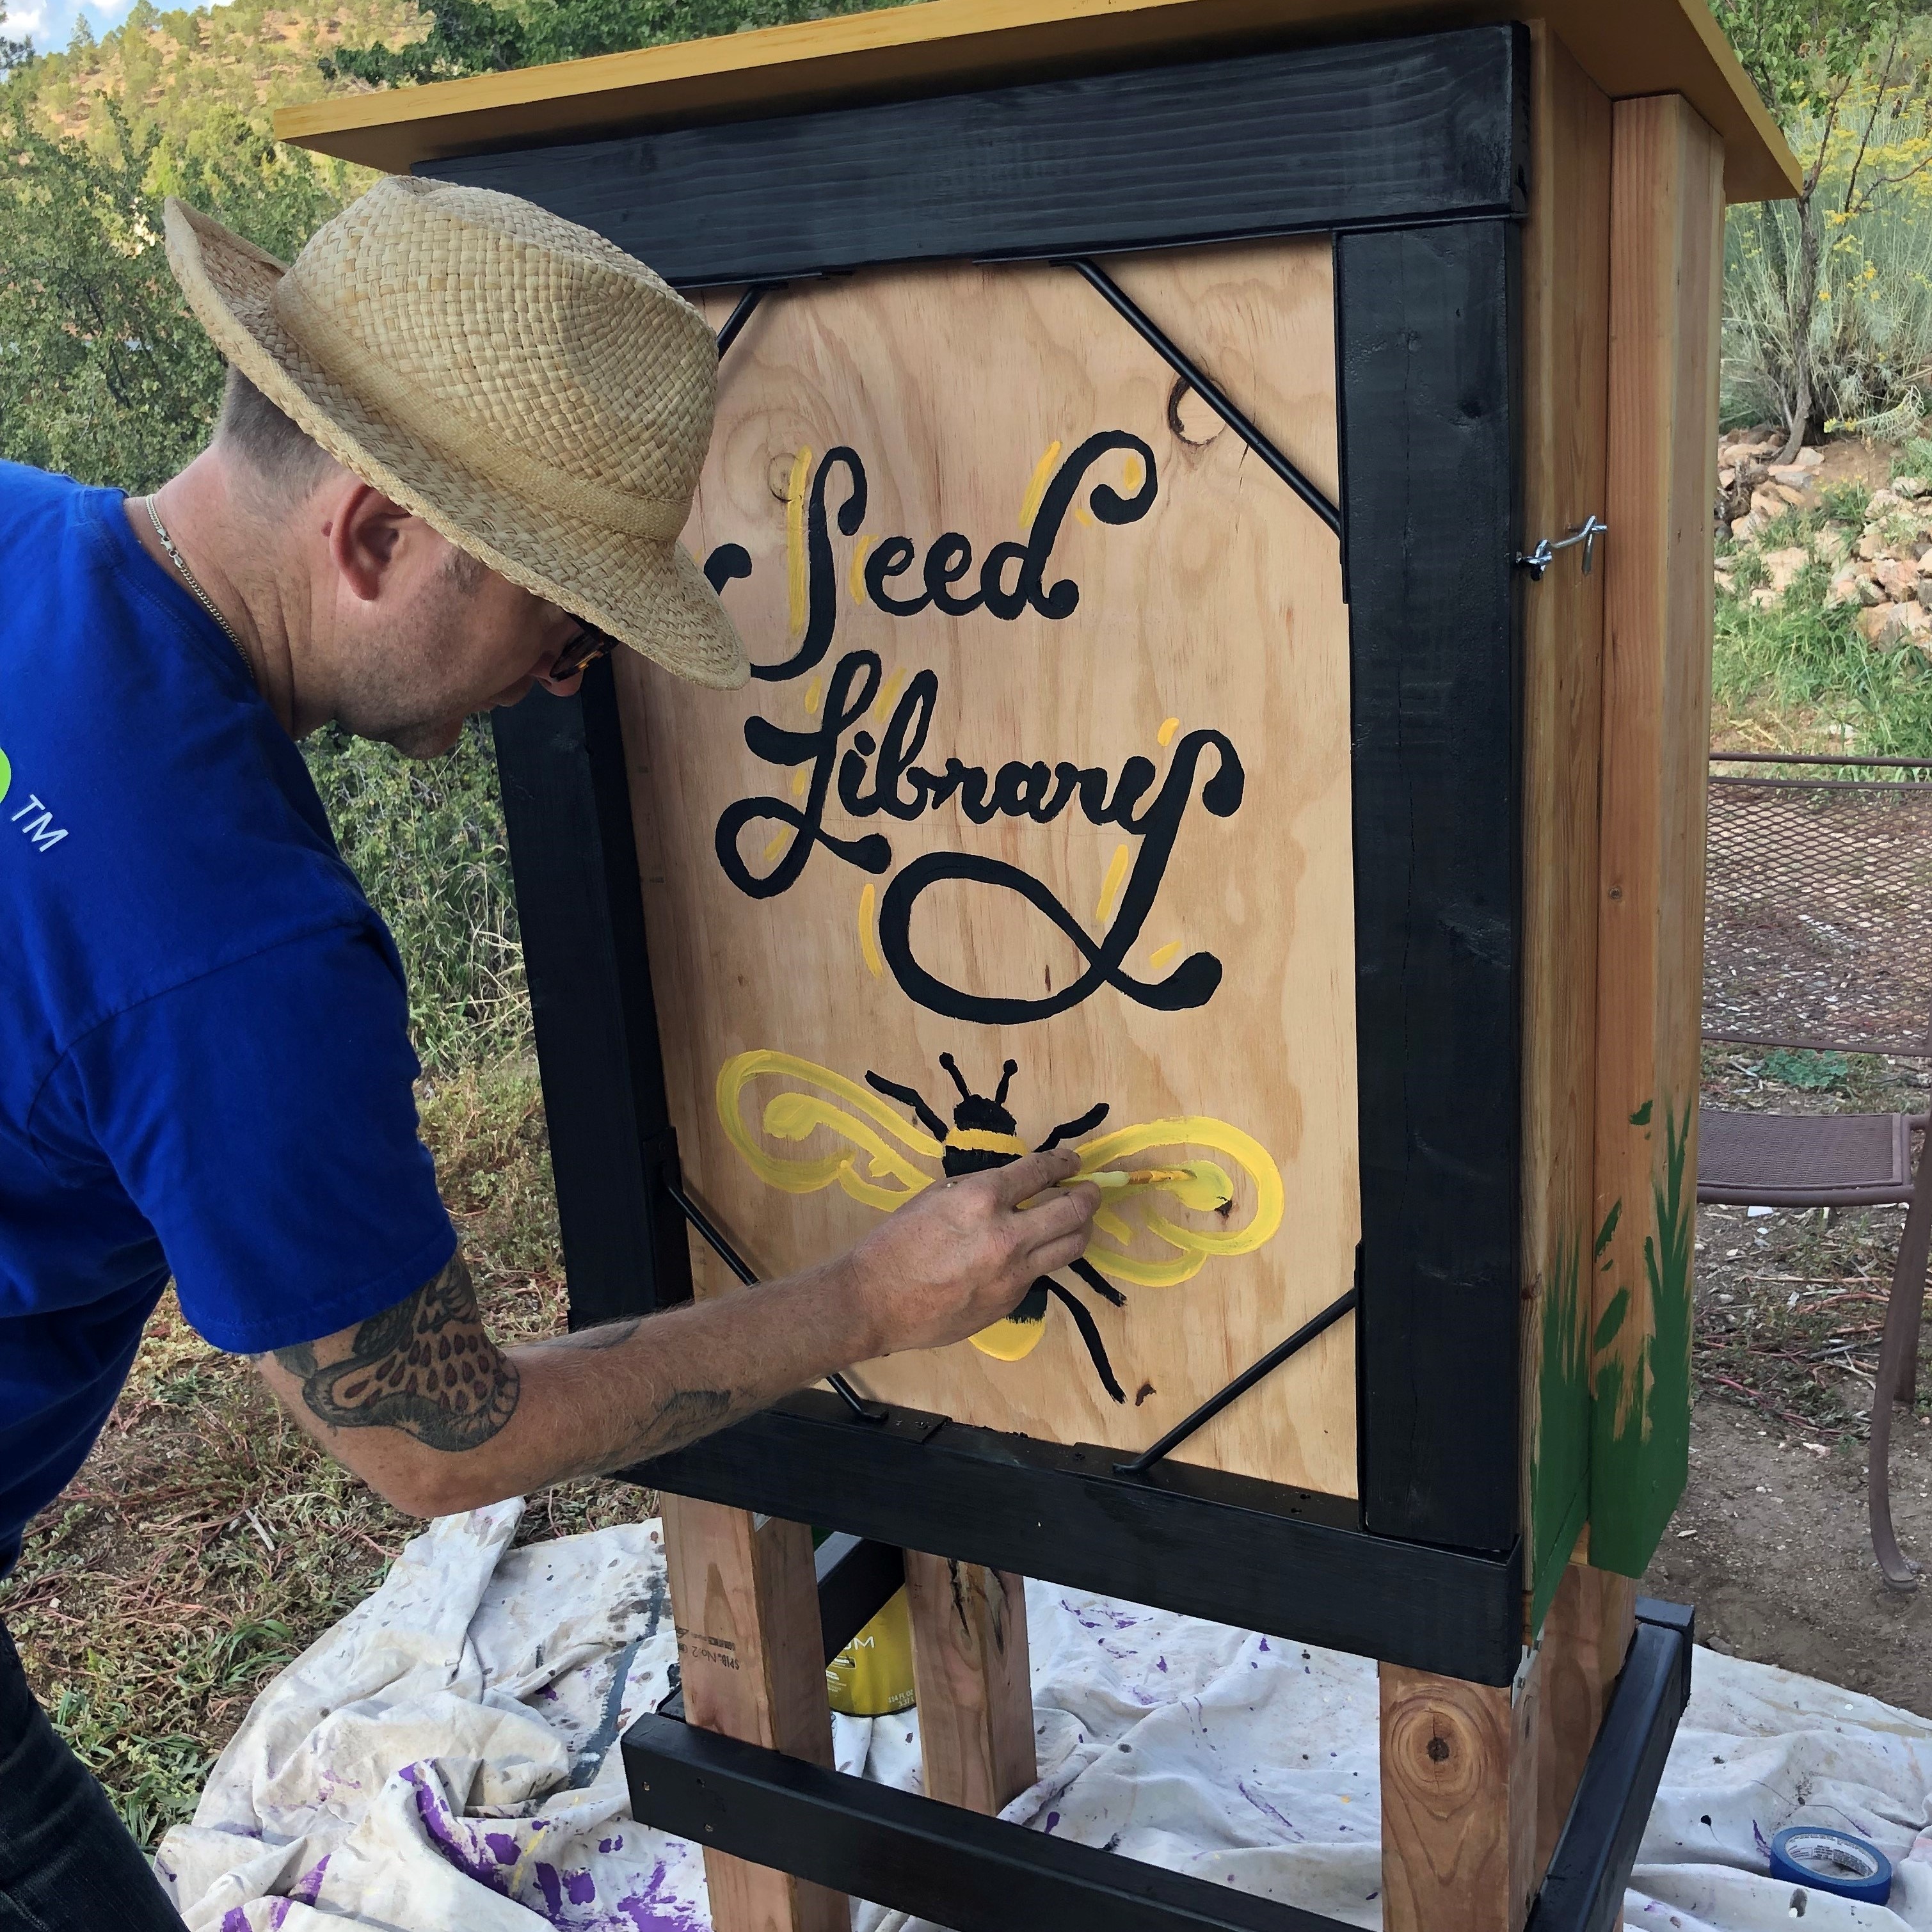 Patrick Iverson puts the finishing touches on the seed library